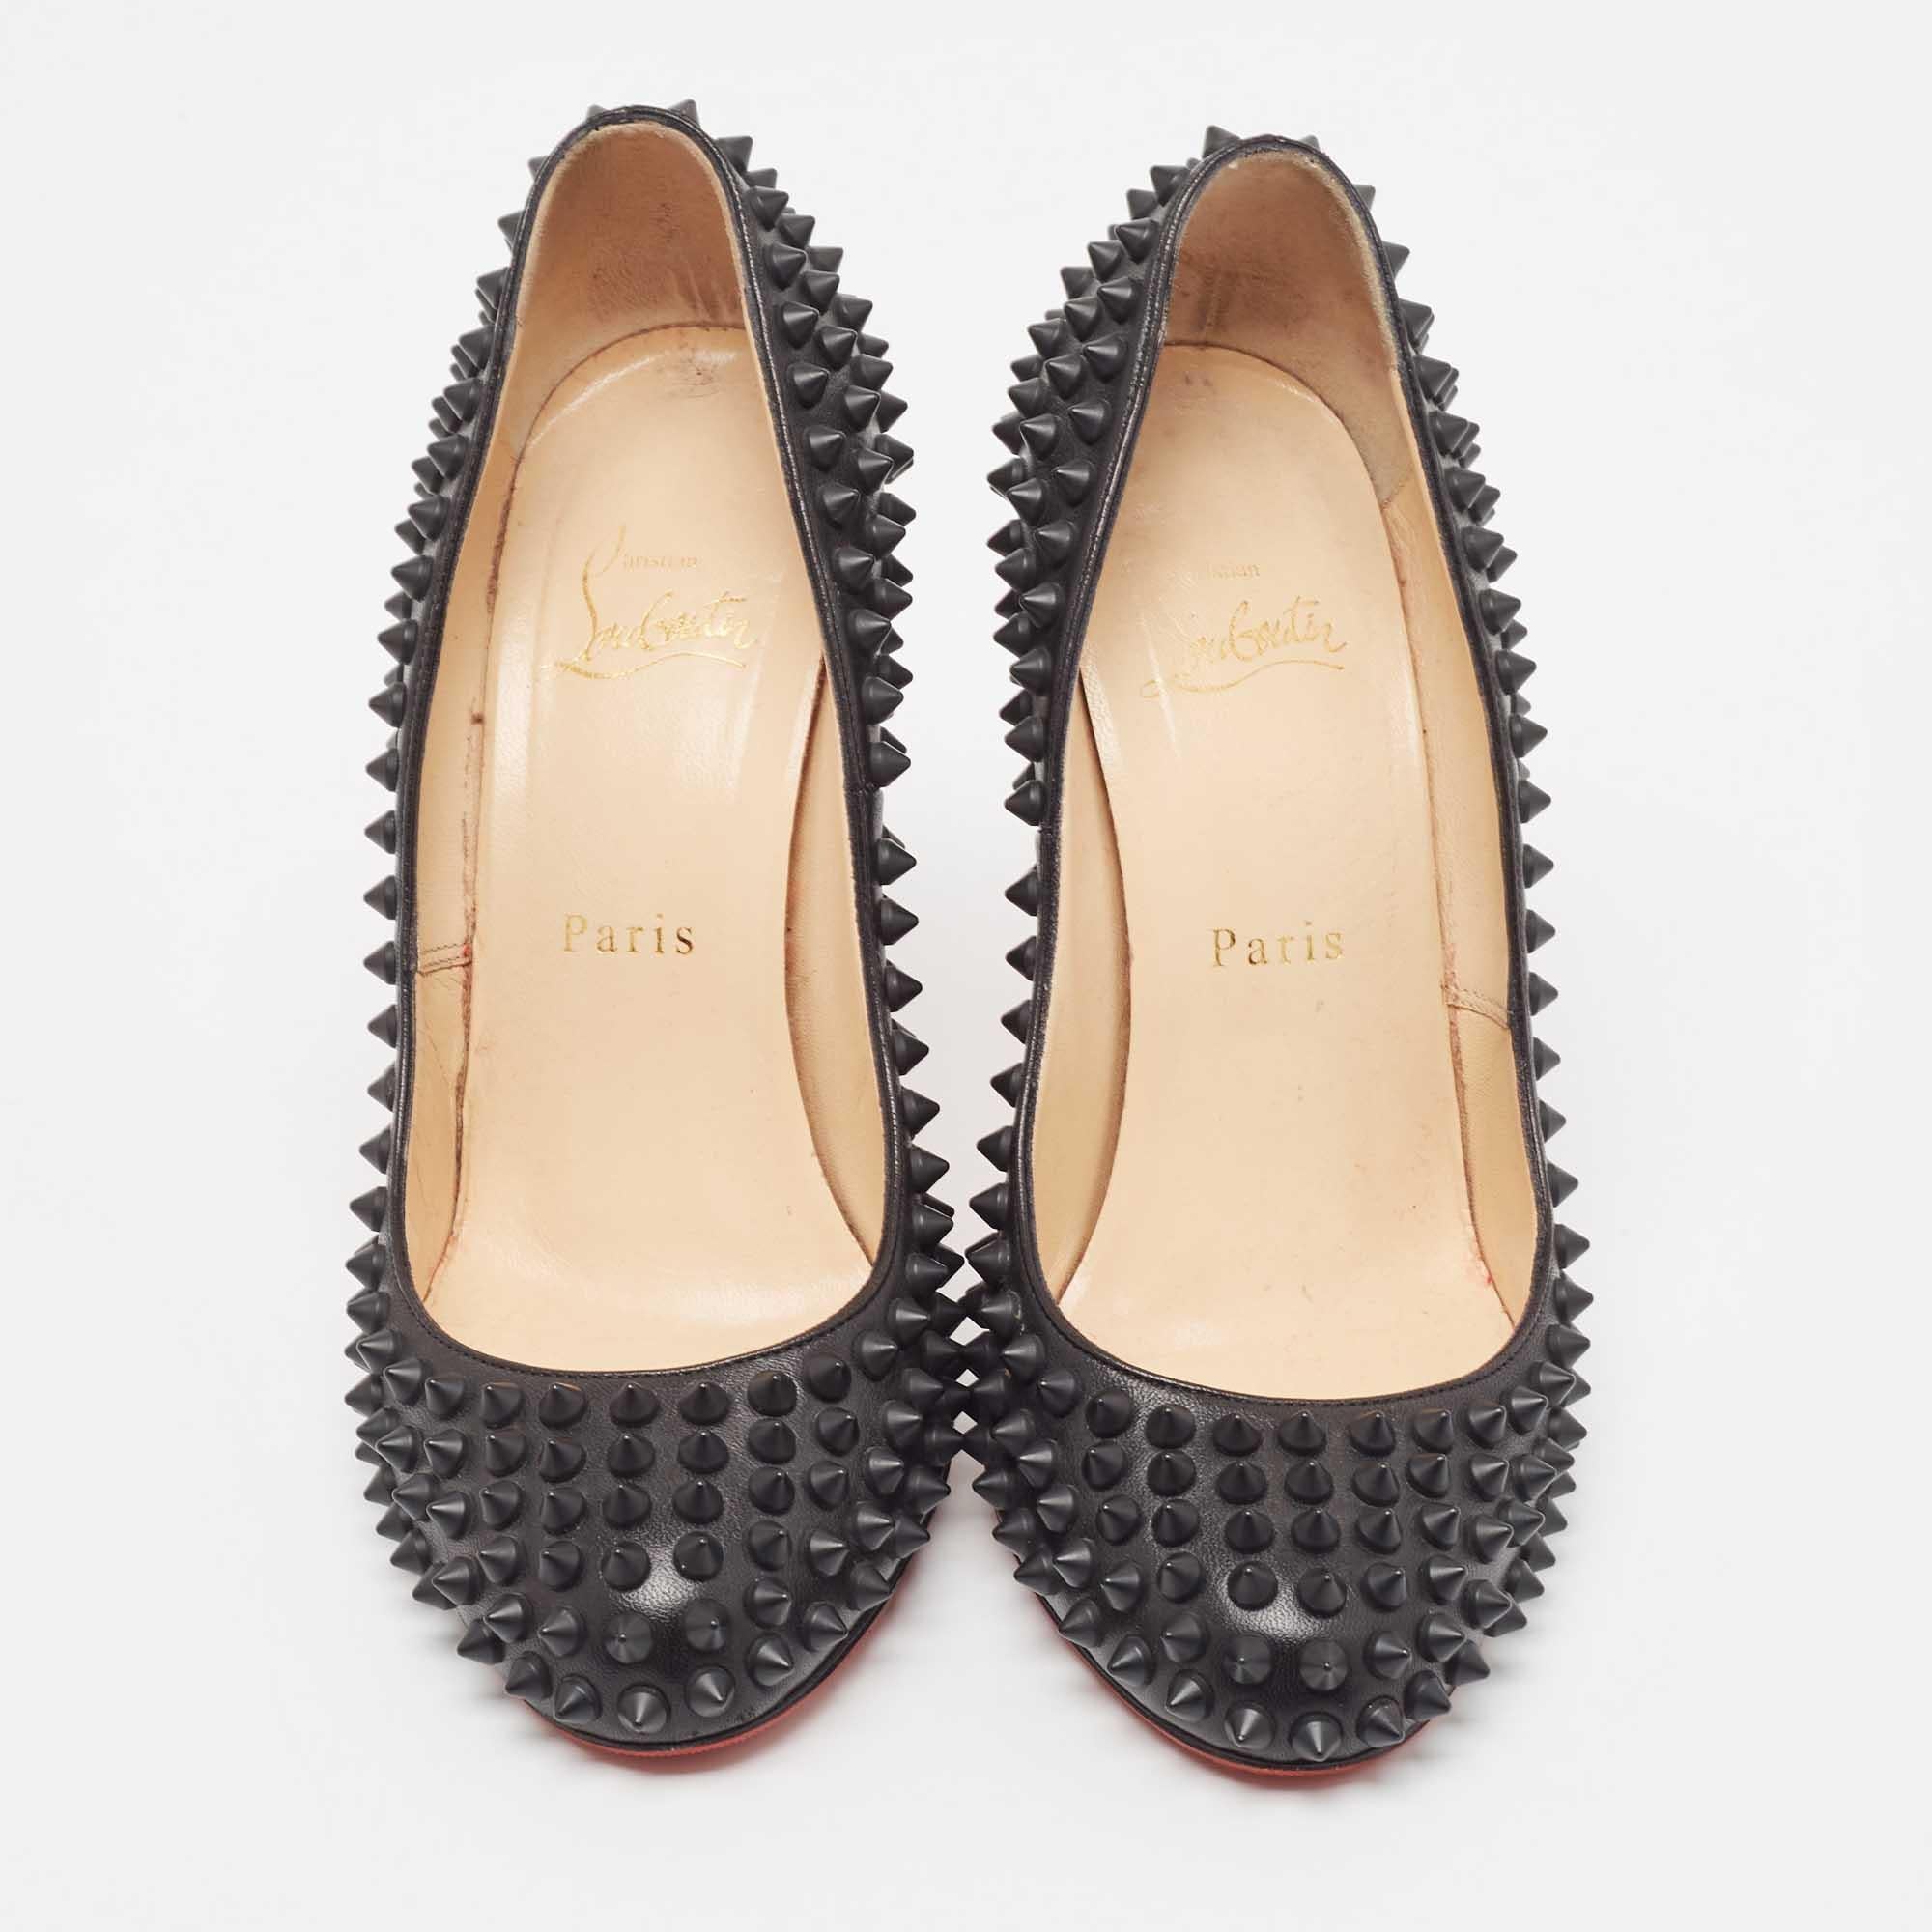 Every shoe collection is incomplete without a pair of dazzling pumps. These Christian Louboutin beauties have been created from leather and styled with round toes, and 9.5 cm heels. The pumps are beautifully adorned with spikes on the exterior and